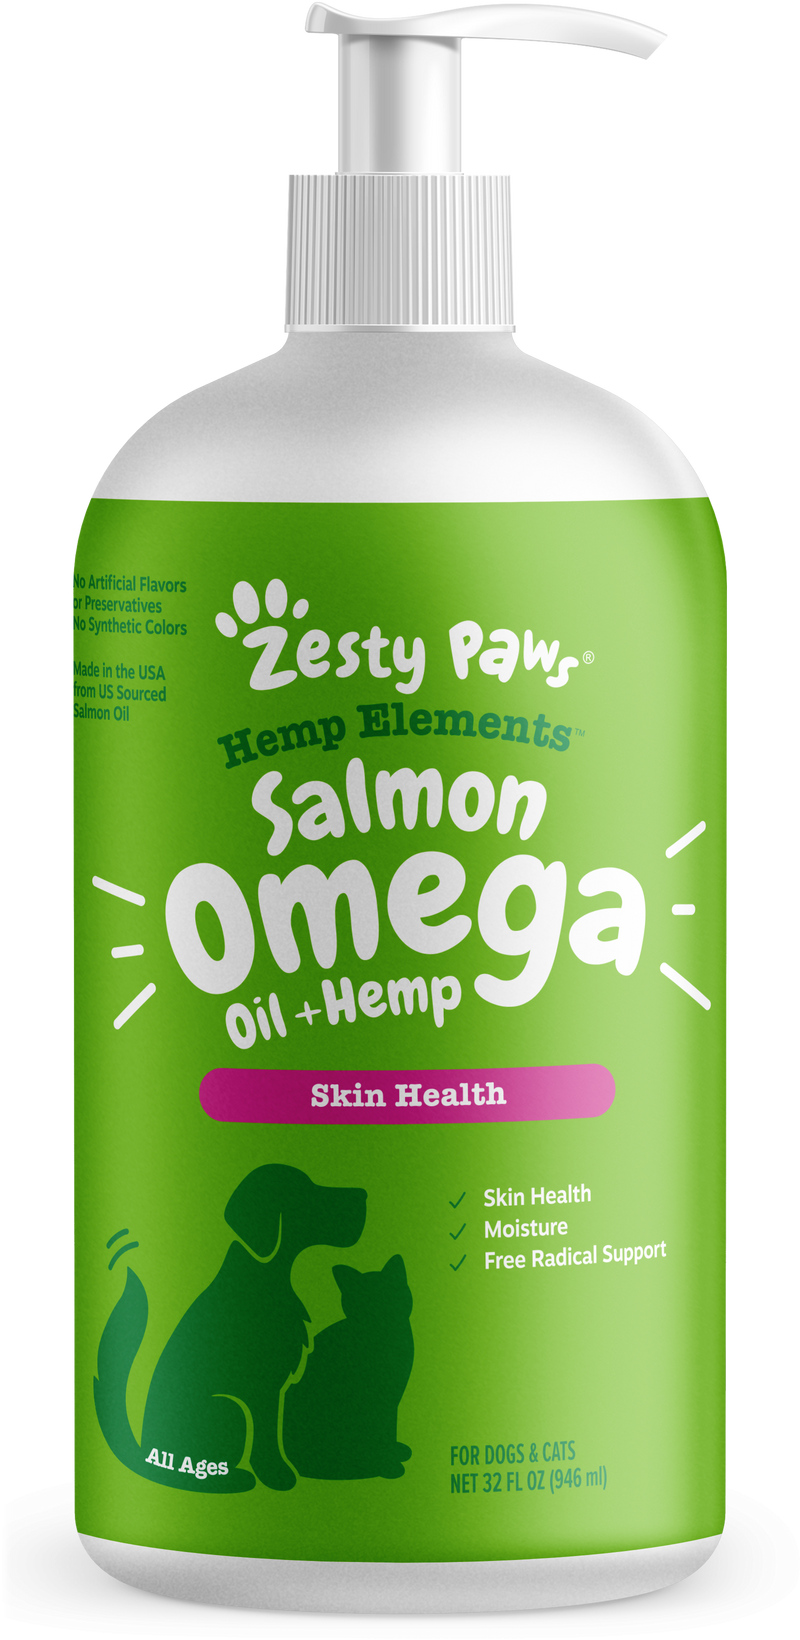 Hemp Elements™ Salmon Omega Oil for Dogs & Cats